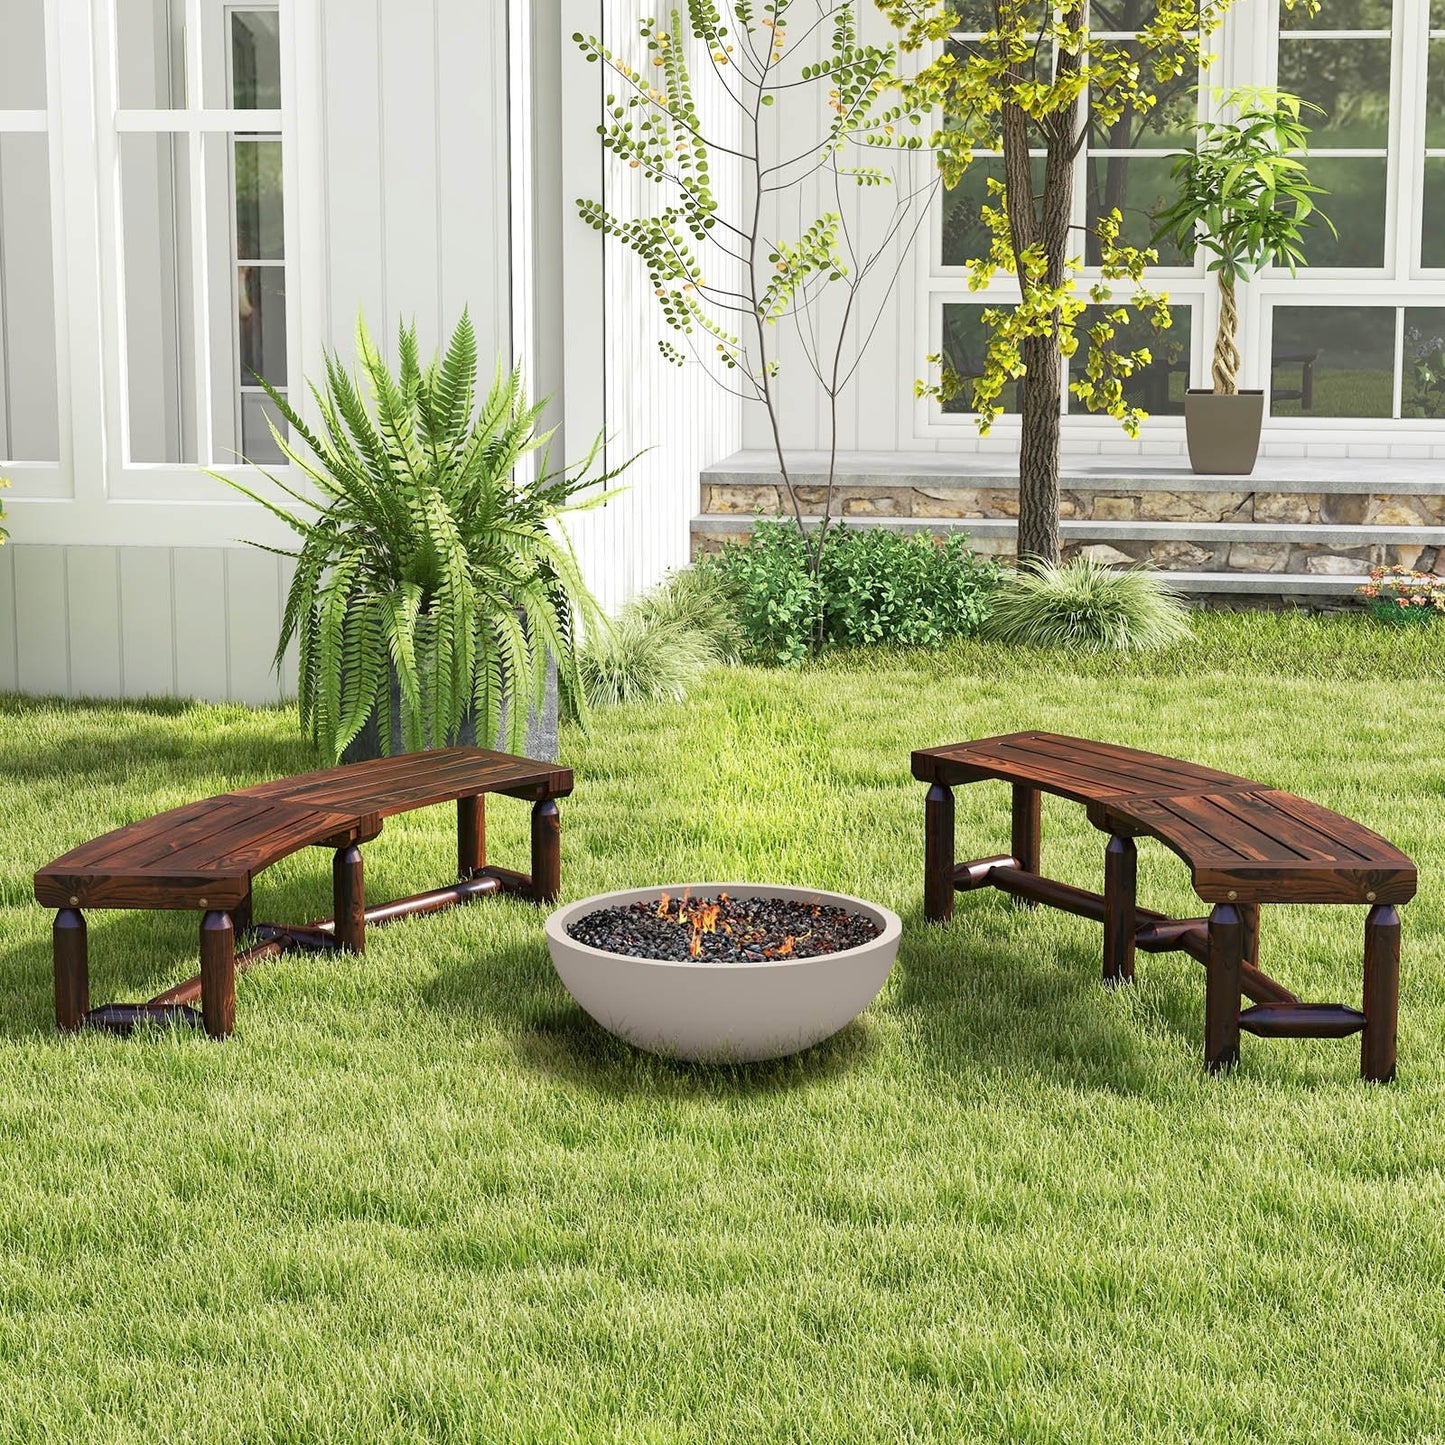 Patio Curved Bench for Round Table Spacious and Slatted Seat, Rustic Brown